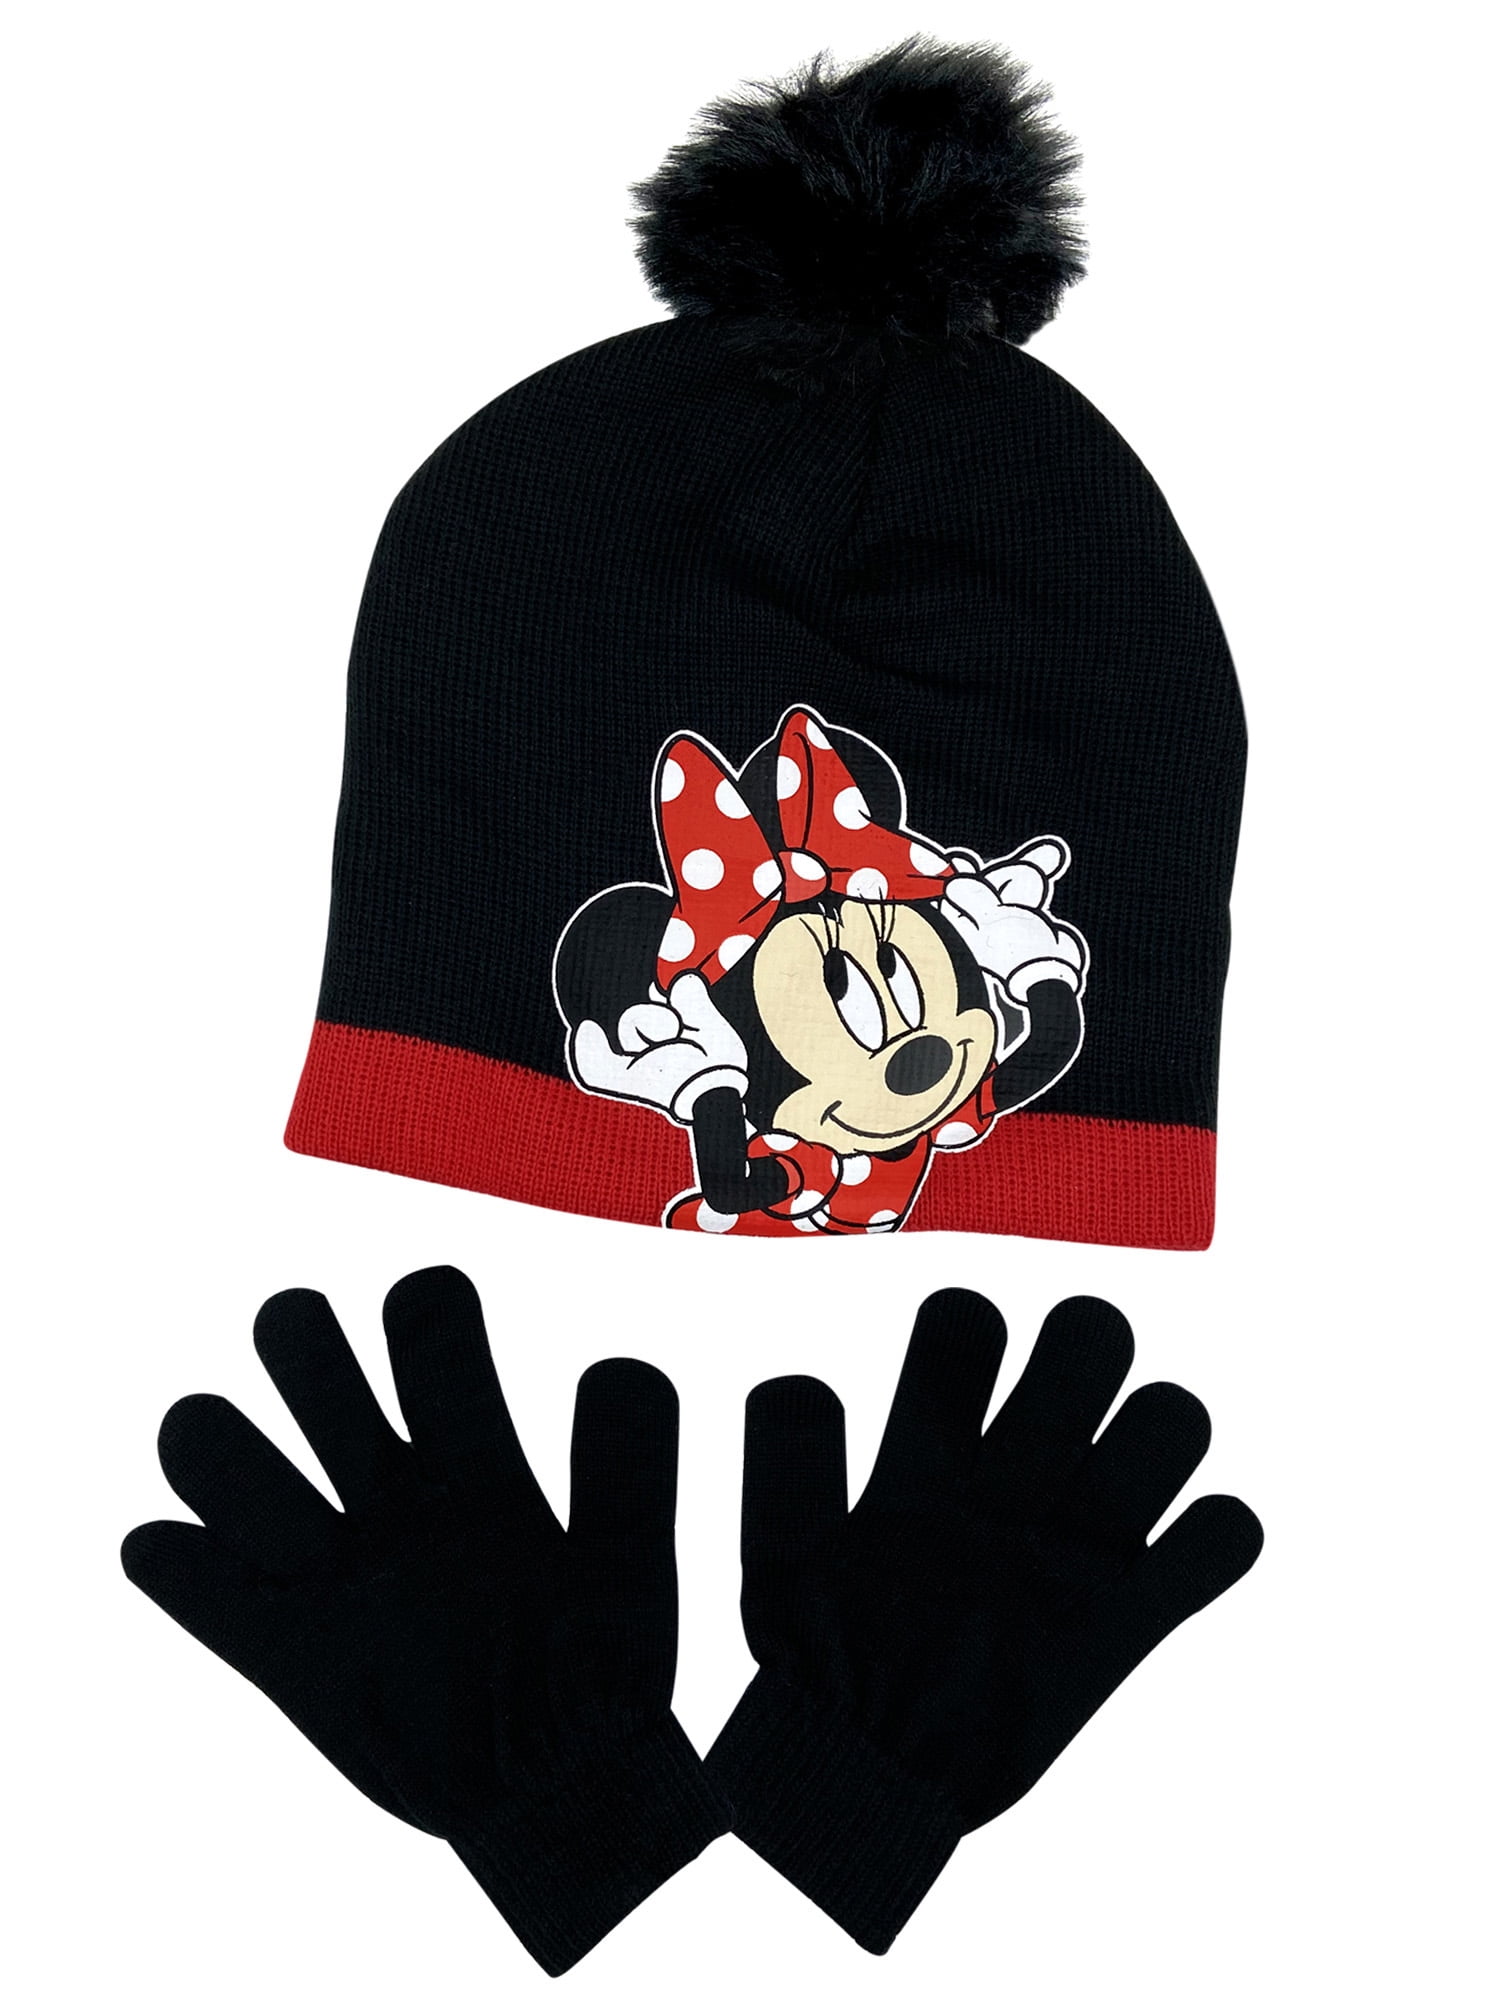 NWT Disney Minnie Mouse Knit Beanie Hat Cap Pink Striped Winter Girls One Size 